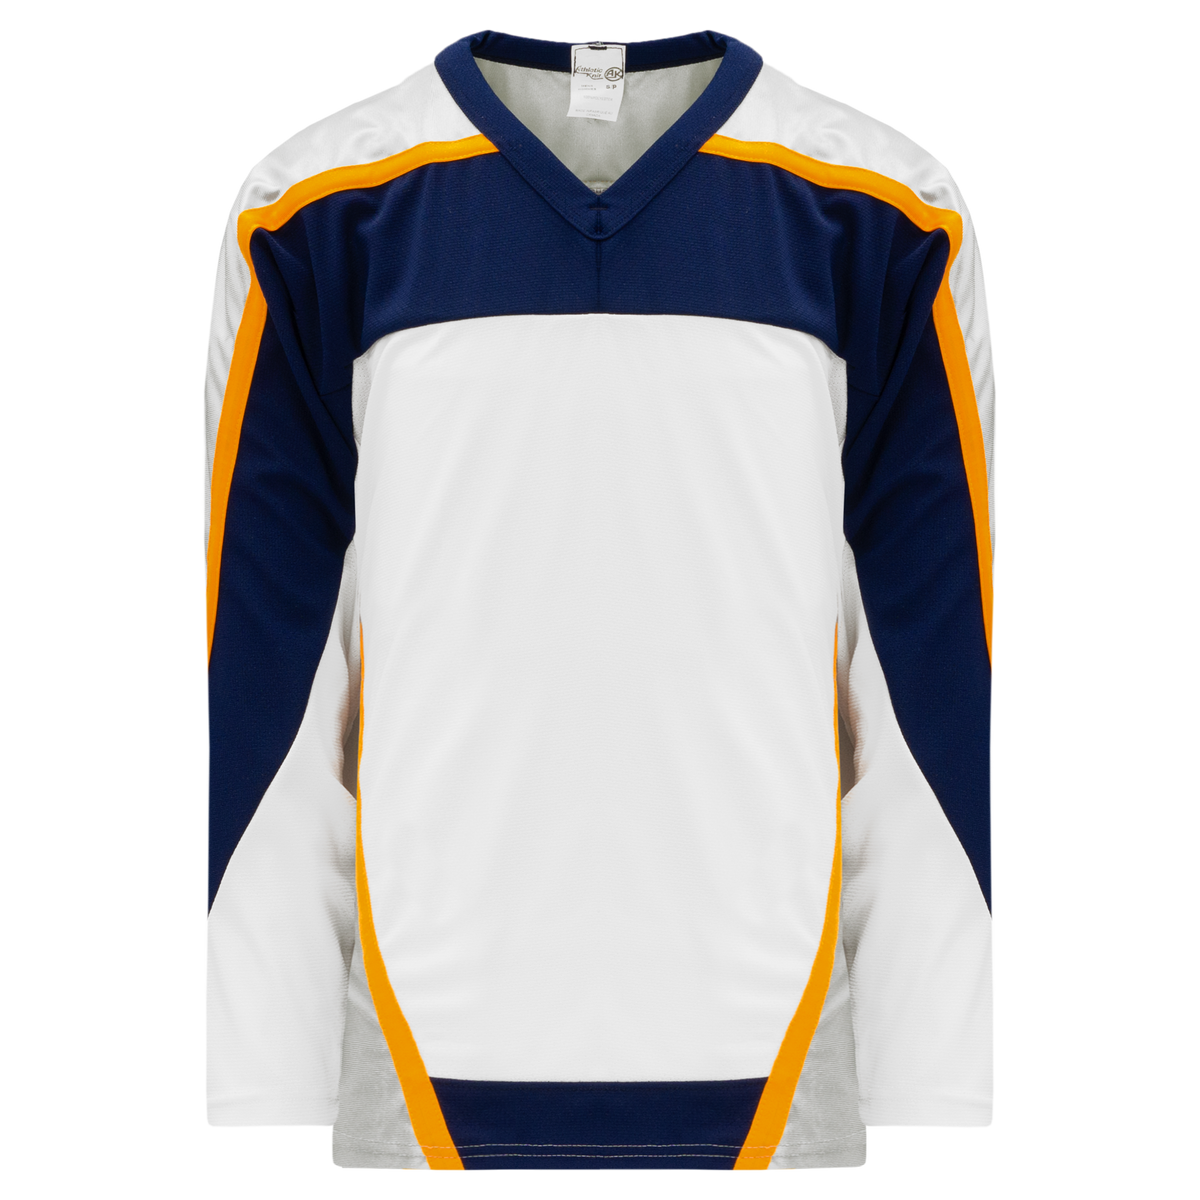 Athletic Knit Lacrosse-Inline Hockey Jersey - Red-Navy-Gold-White